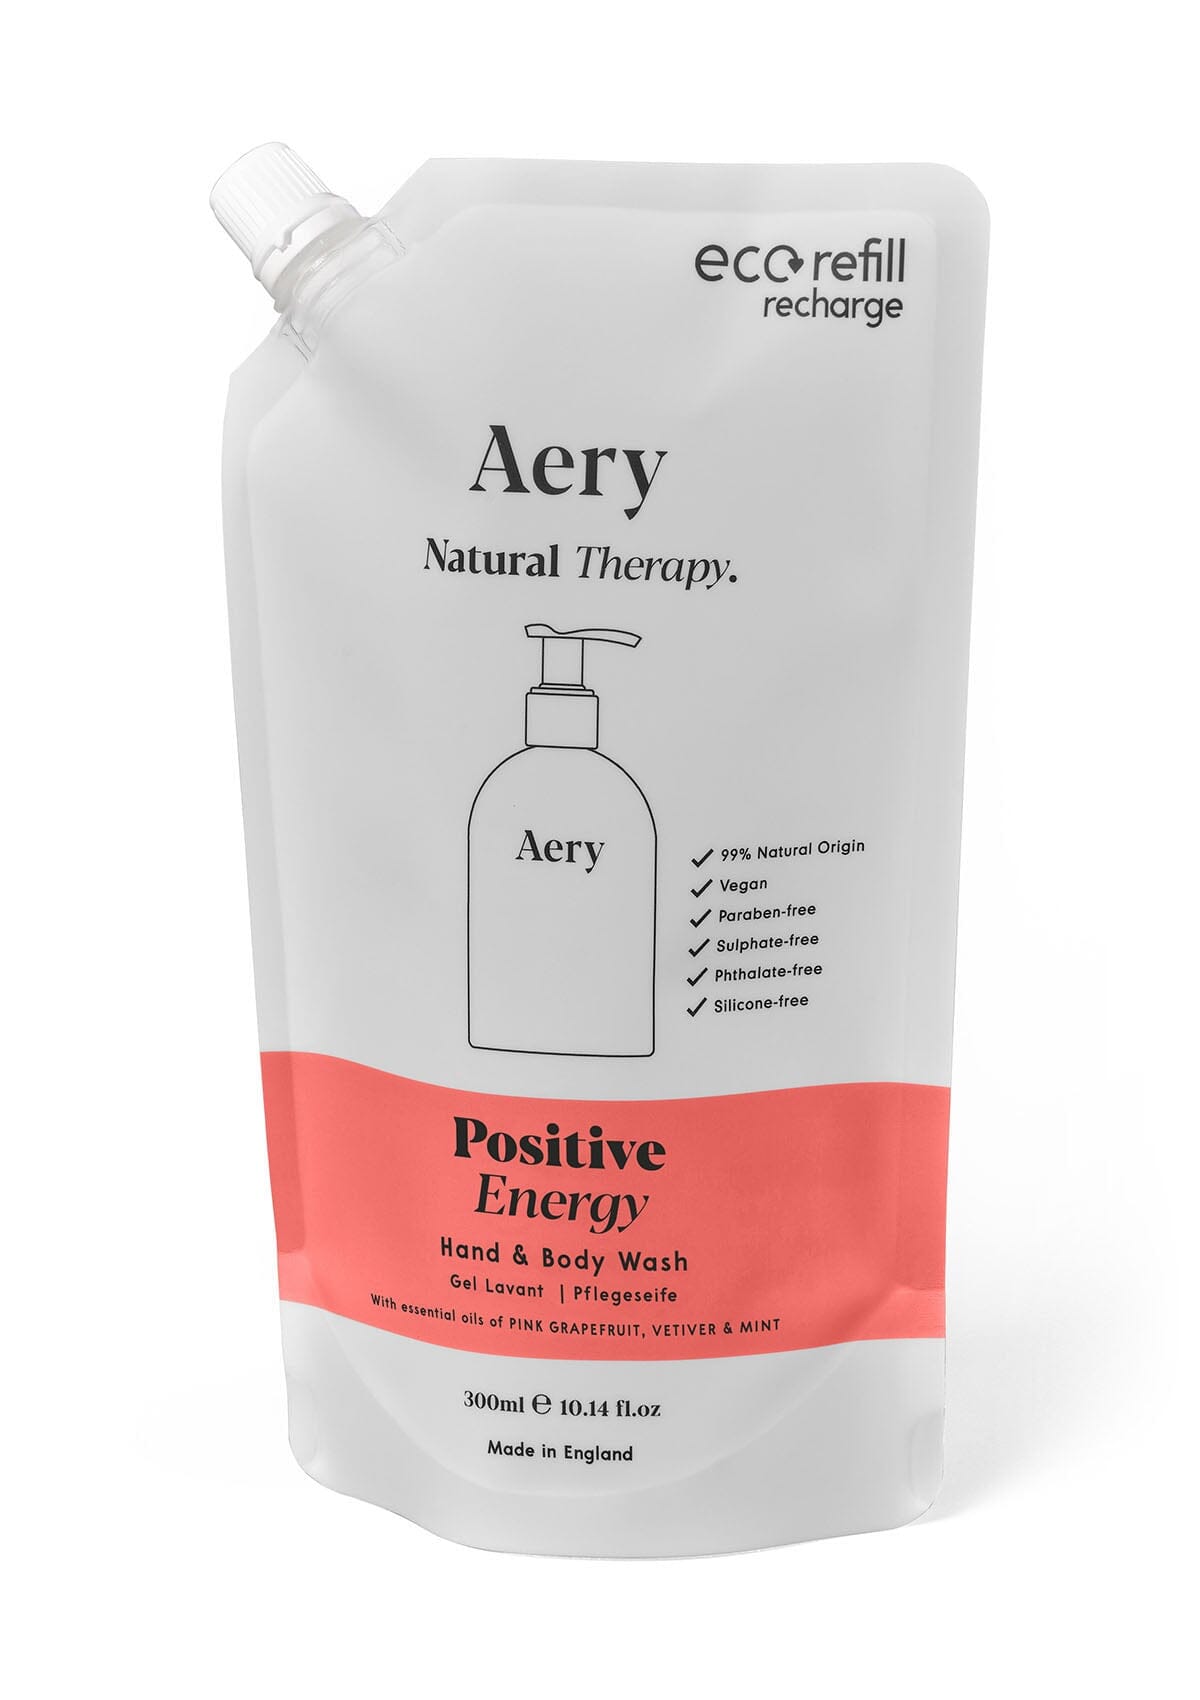 Red Positive Energy hand and body wash refill pouch on white background 